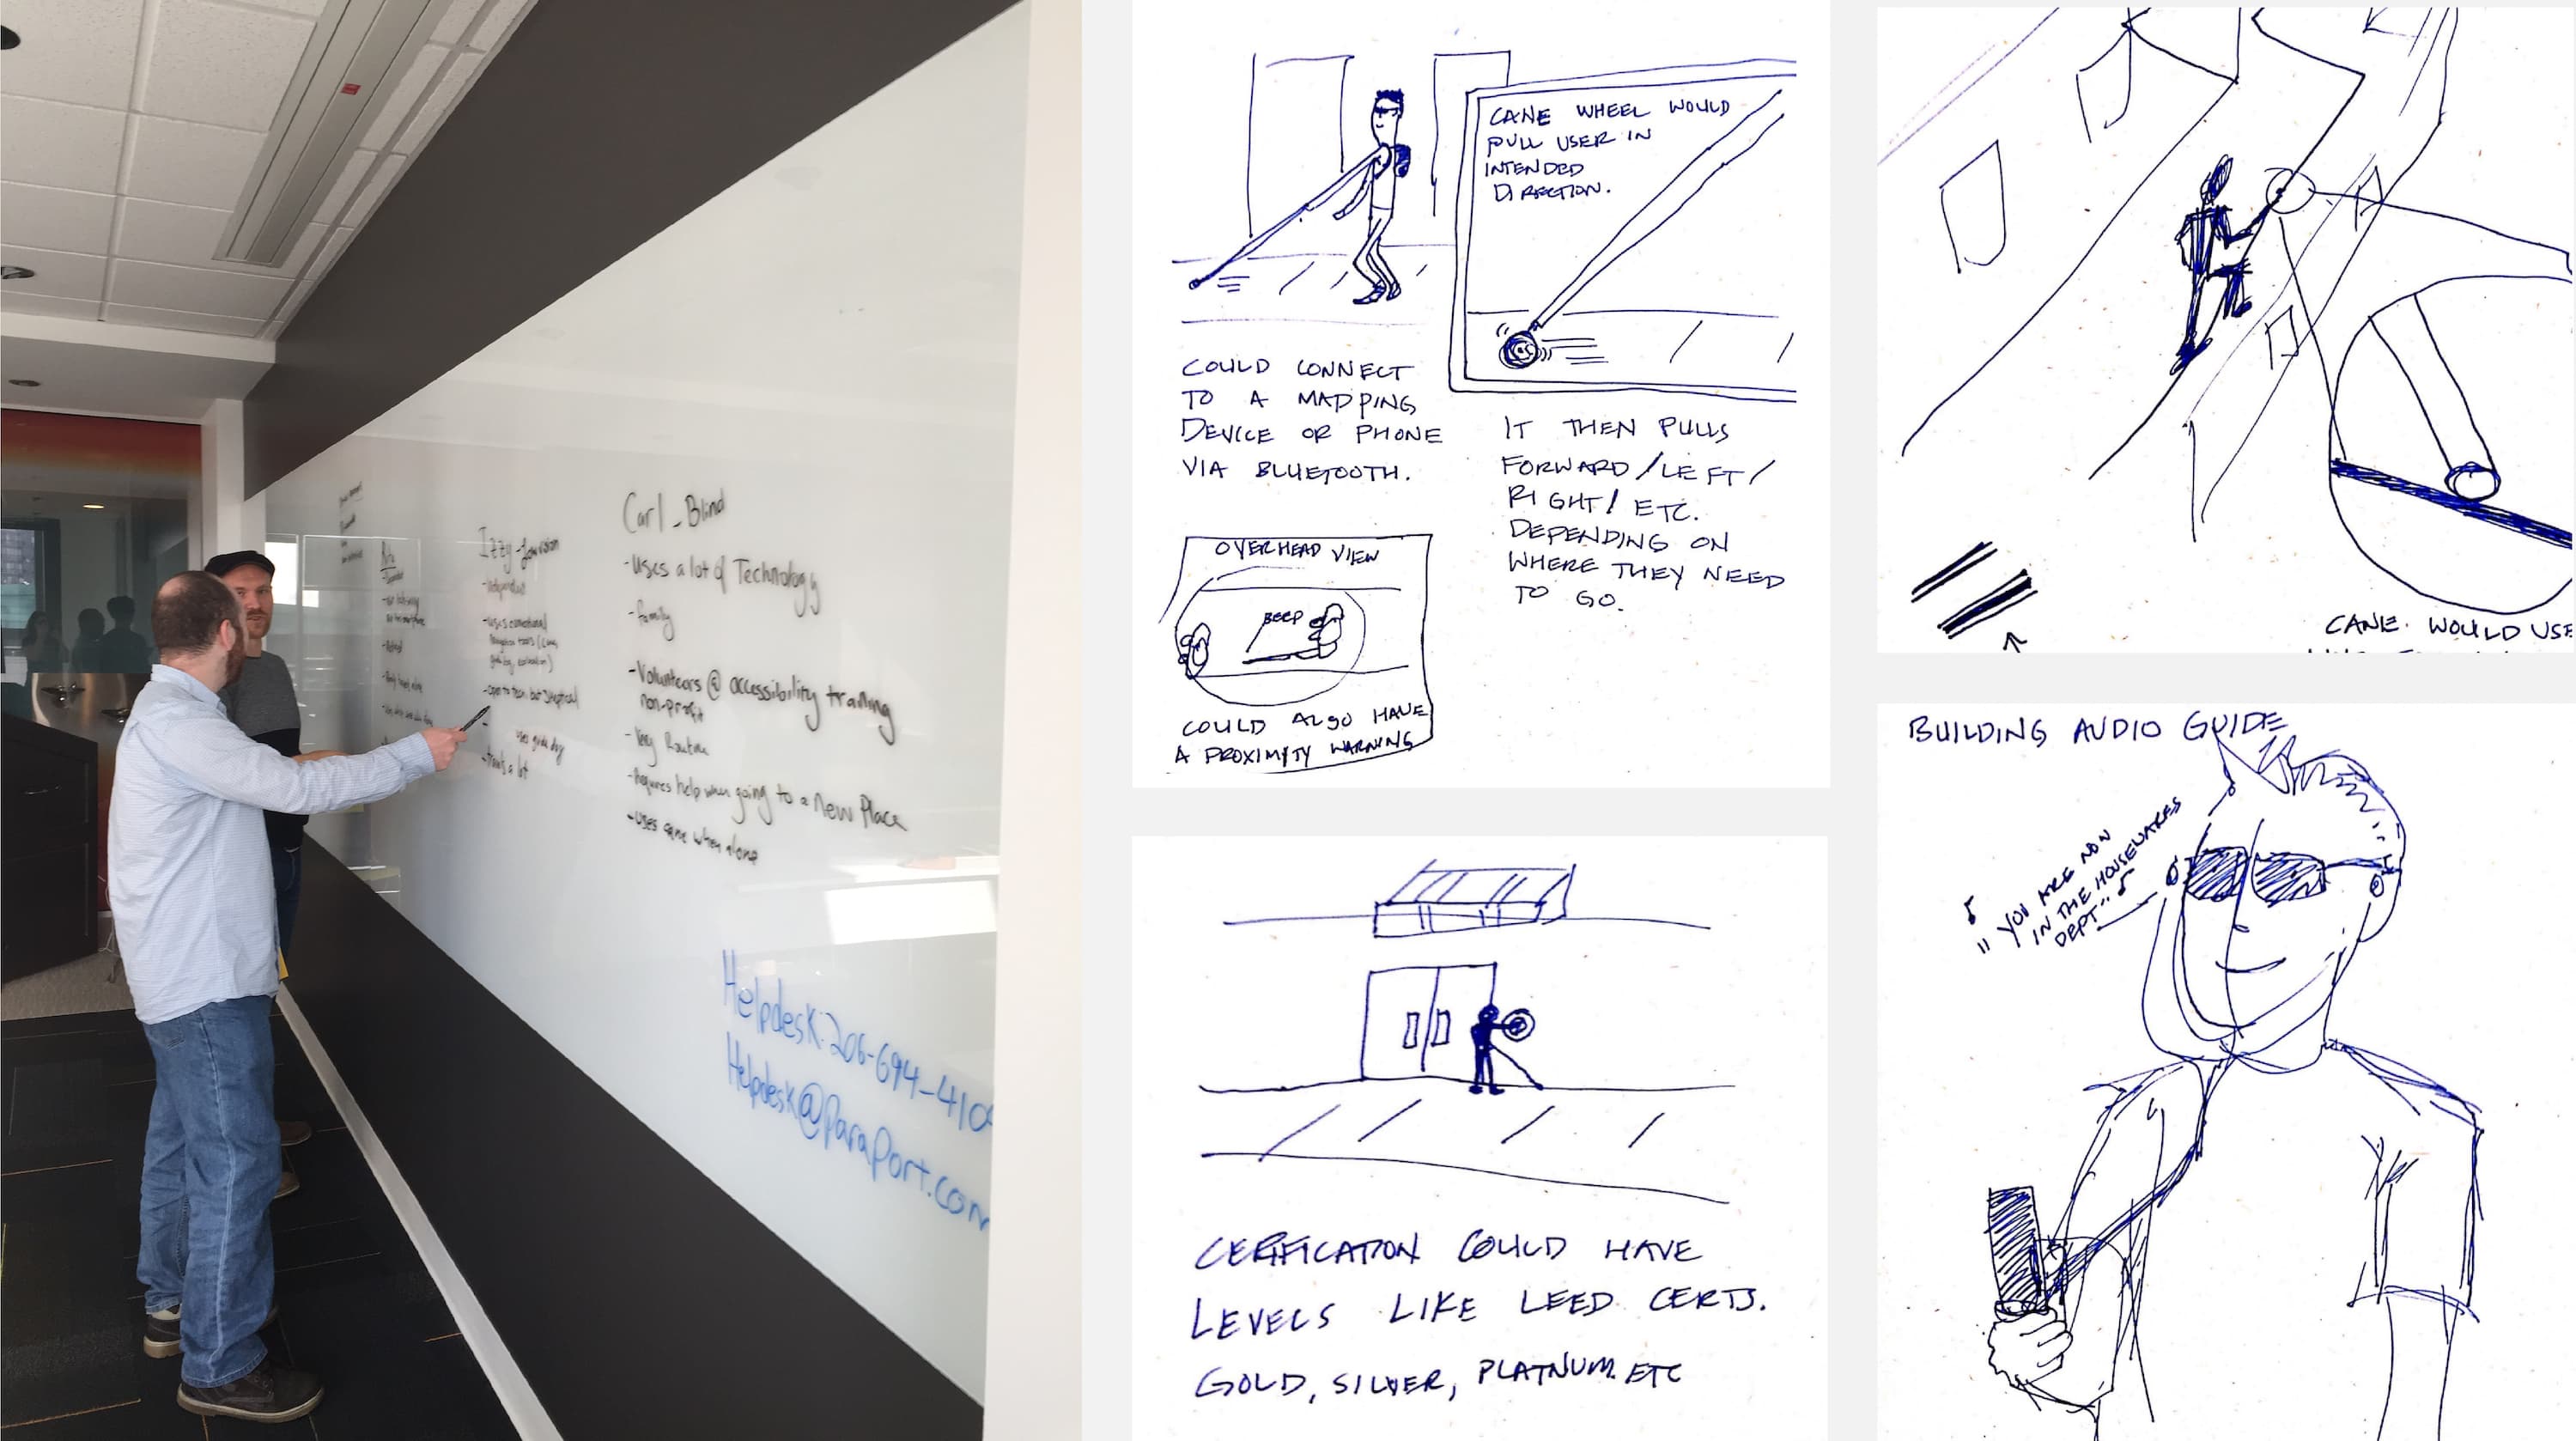 A collage of images showing ideation and sketching. One image shows two people standing at a whiteboard. Four images are hand drawn sketches of ideas.